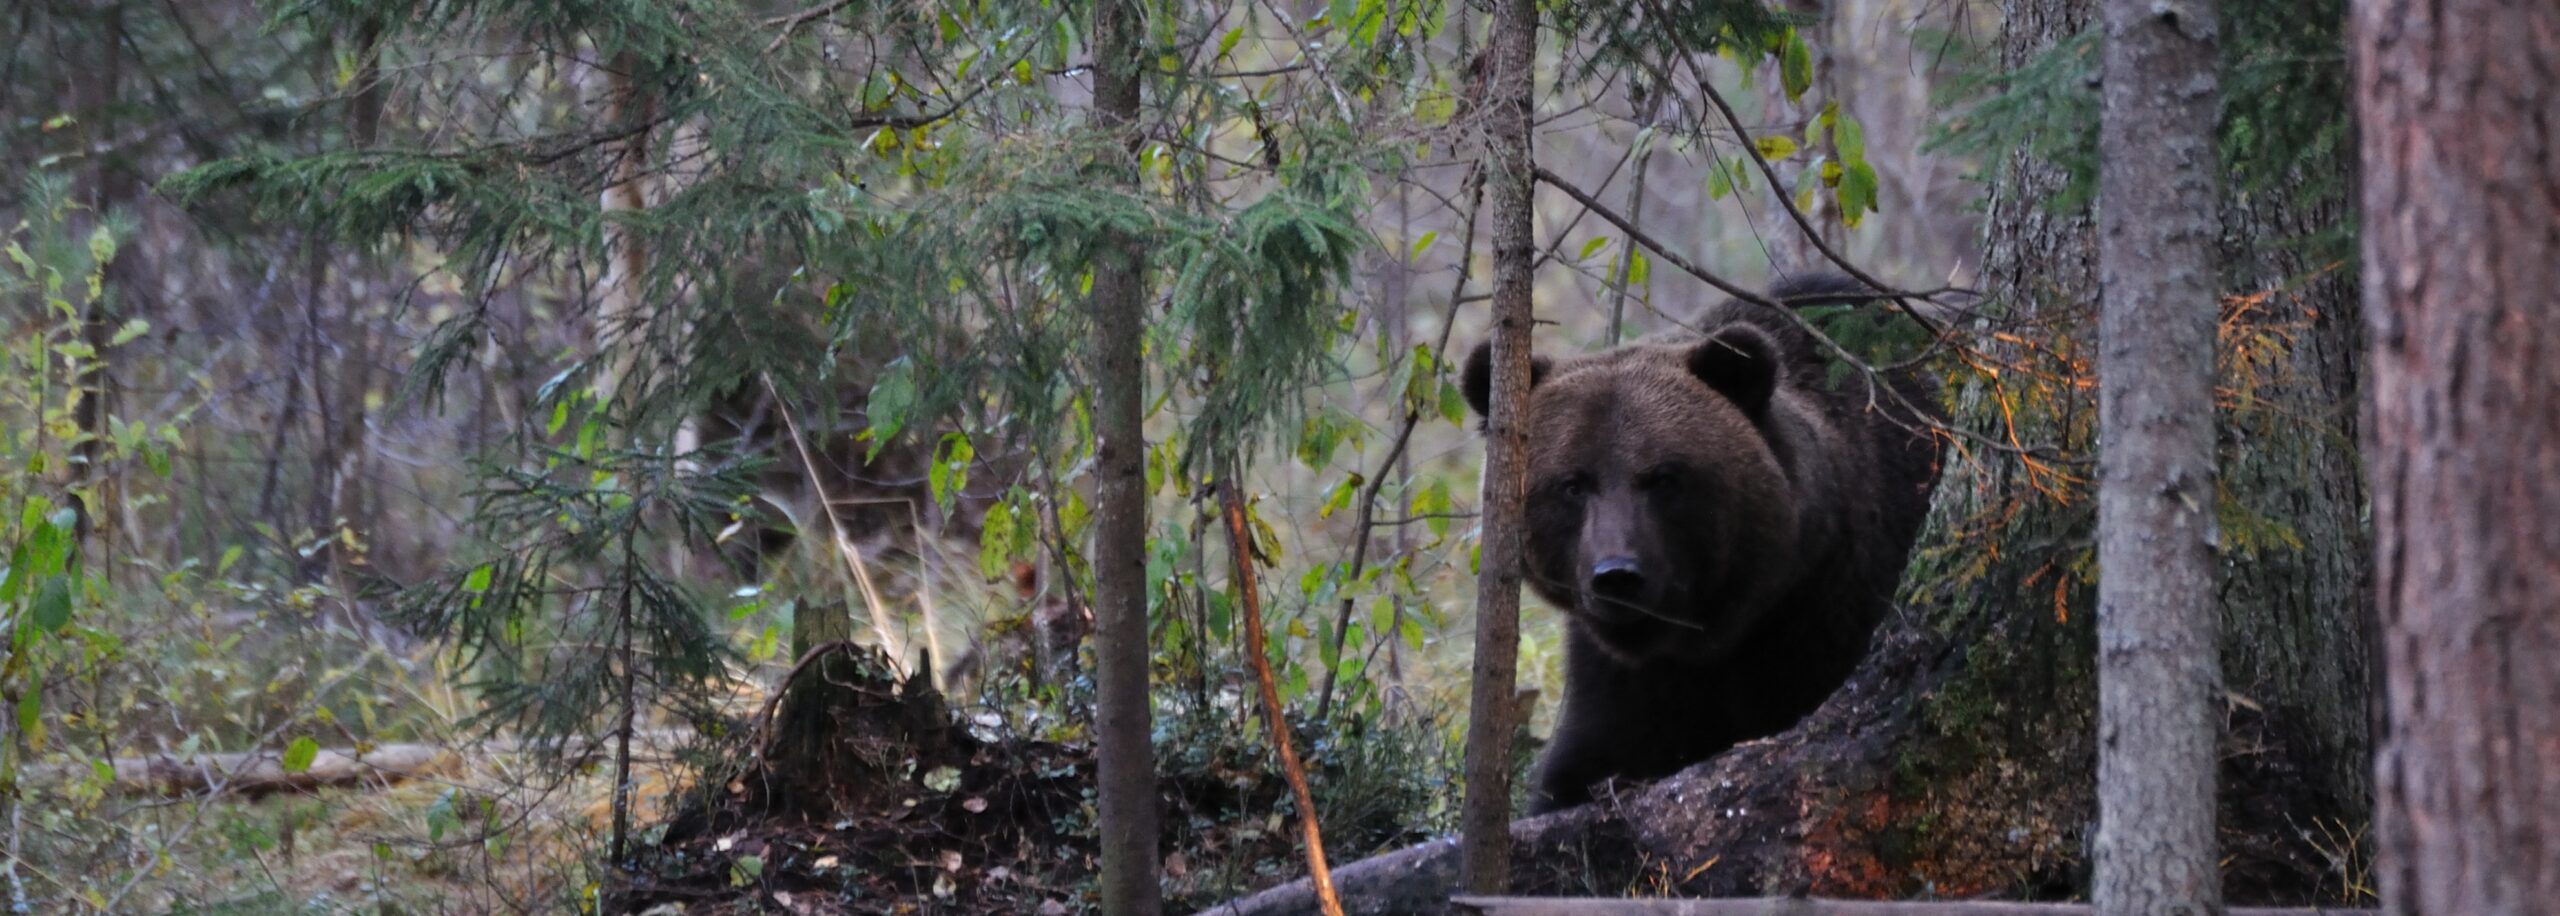 Bear Watching and Nature Tours in Estonia